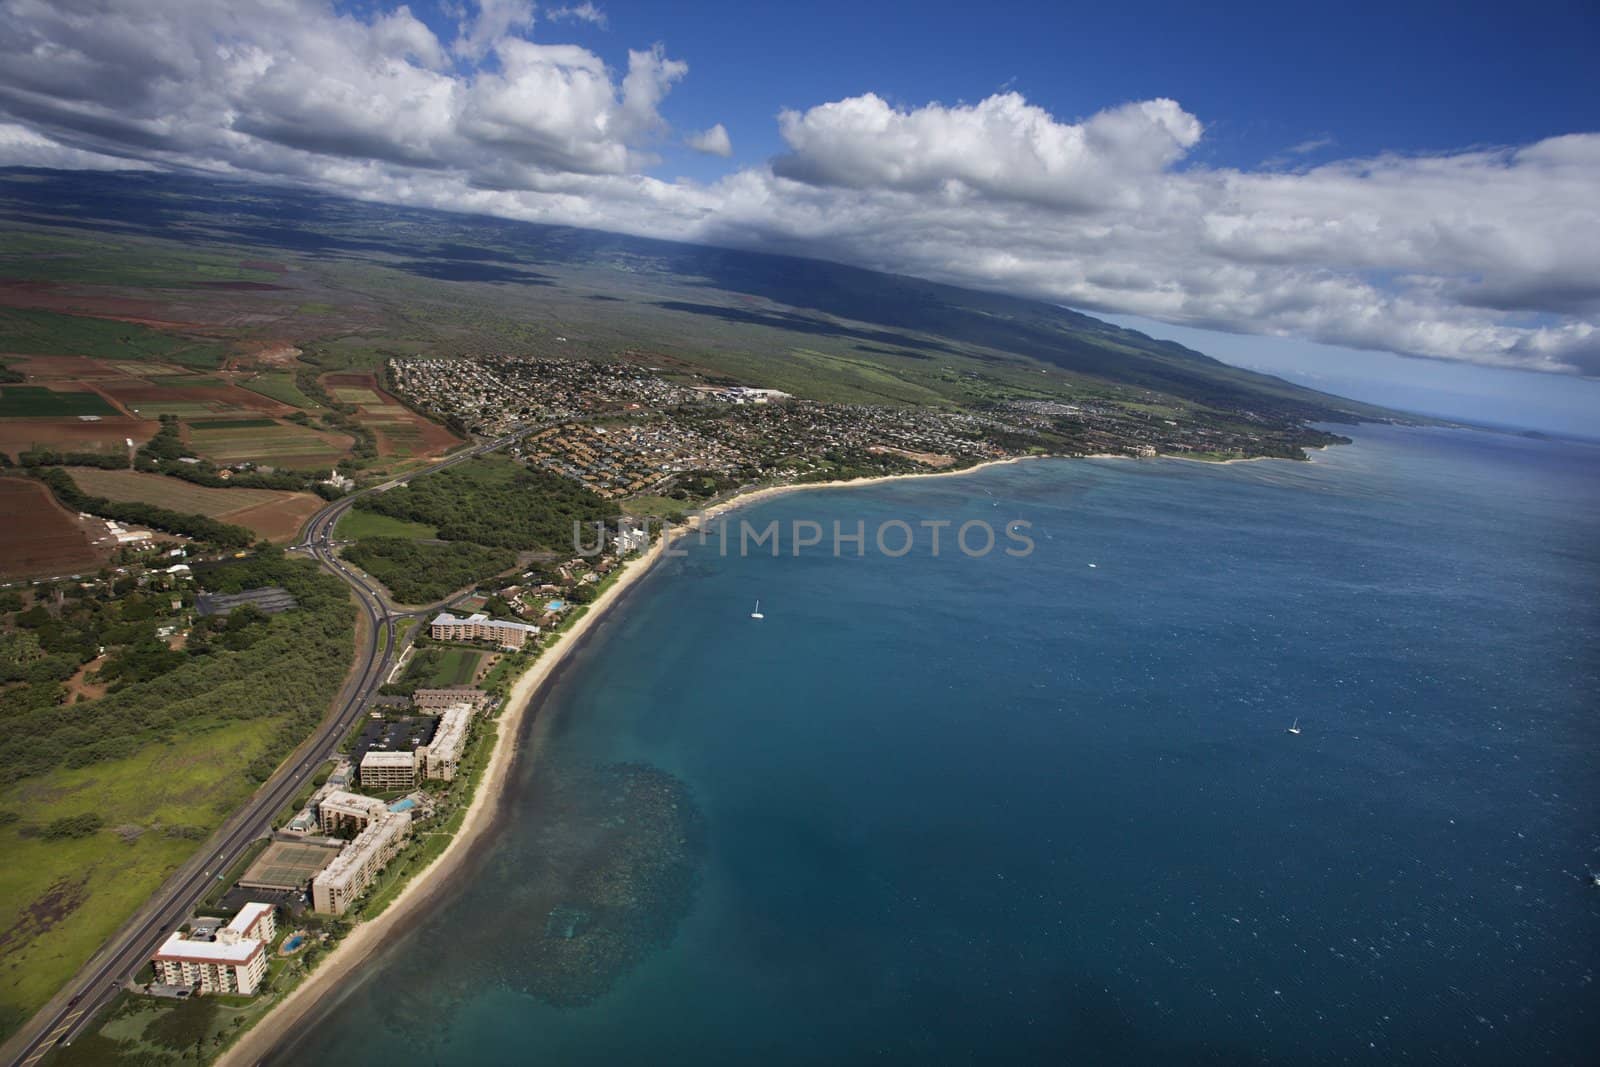 Aerial view of coast and beach in Maui, Hawaii.